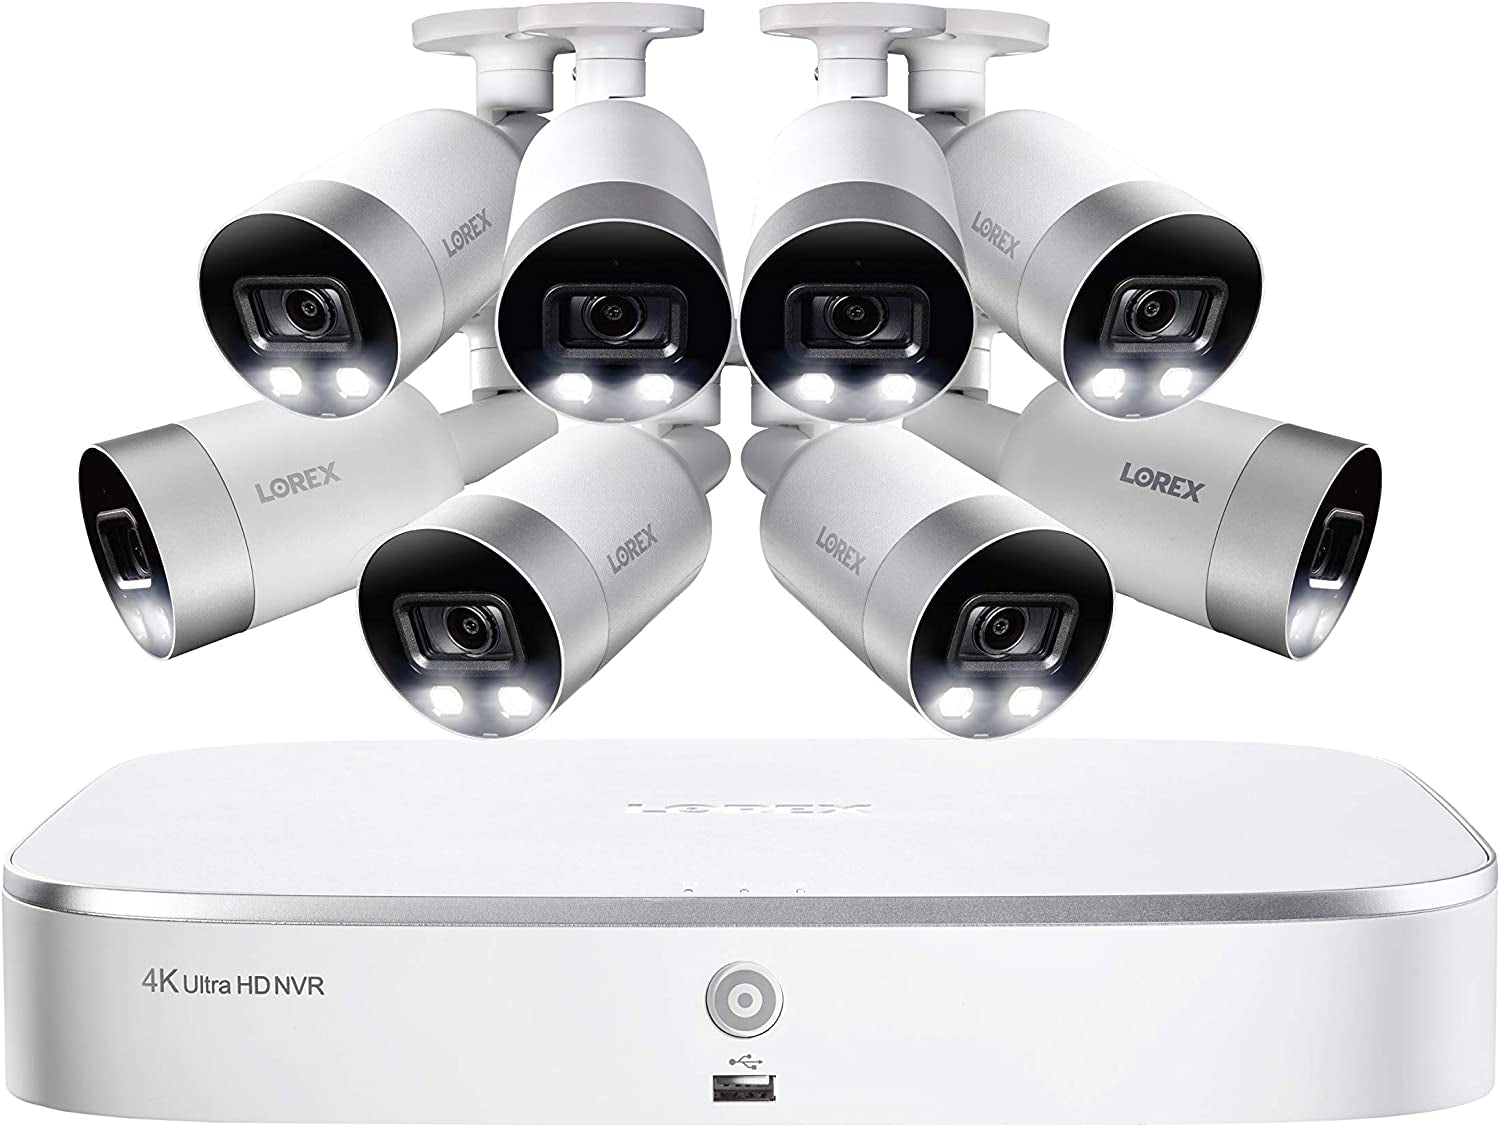 4K Security Camera System,8-Channel 2TB NVR with 8 Indoor/Outdoor Wired IP POE Metal Bullet Cameras with Smart Motion Detection Surveillance, Active Deterrence and Color Night Vision